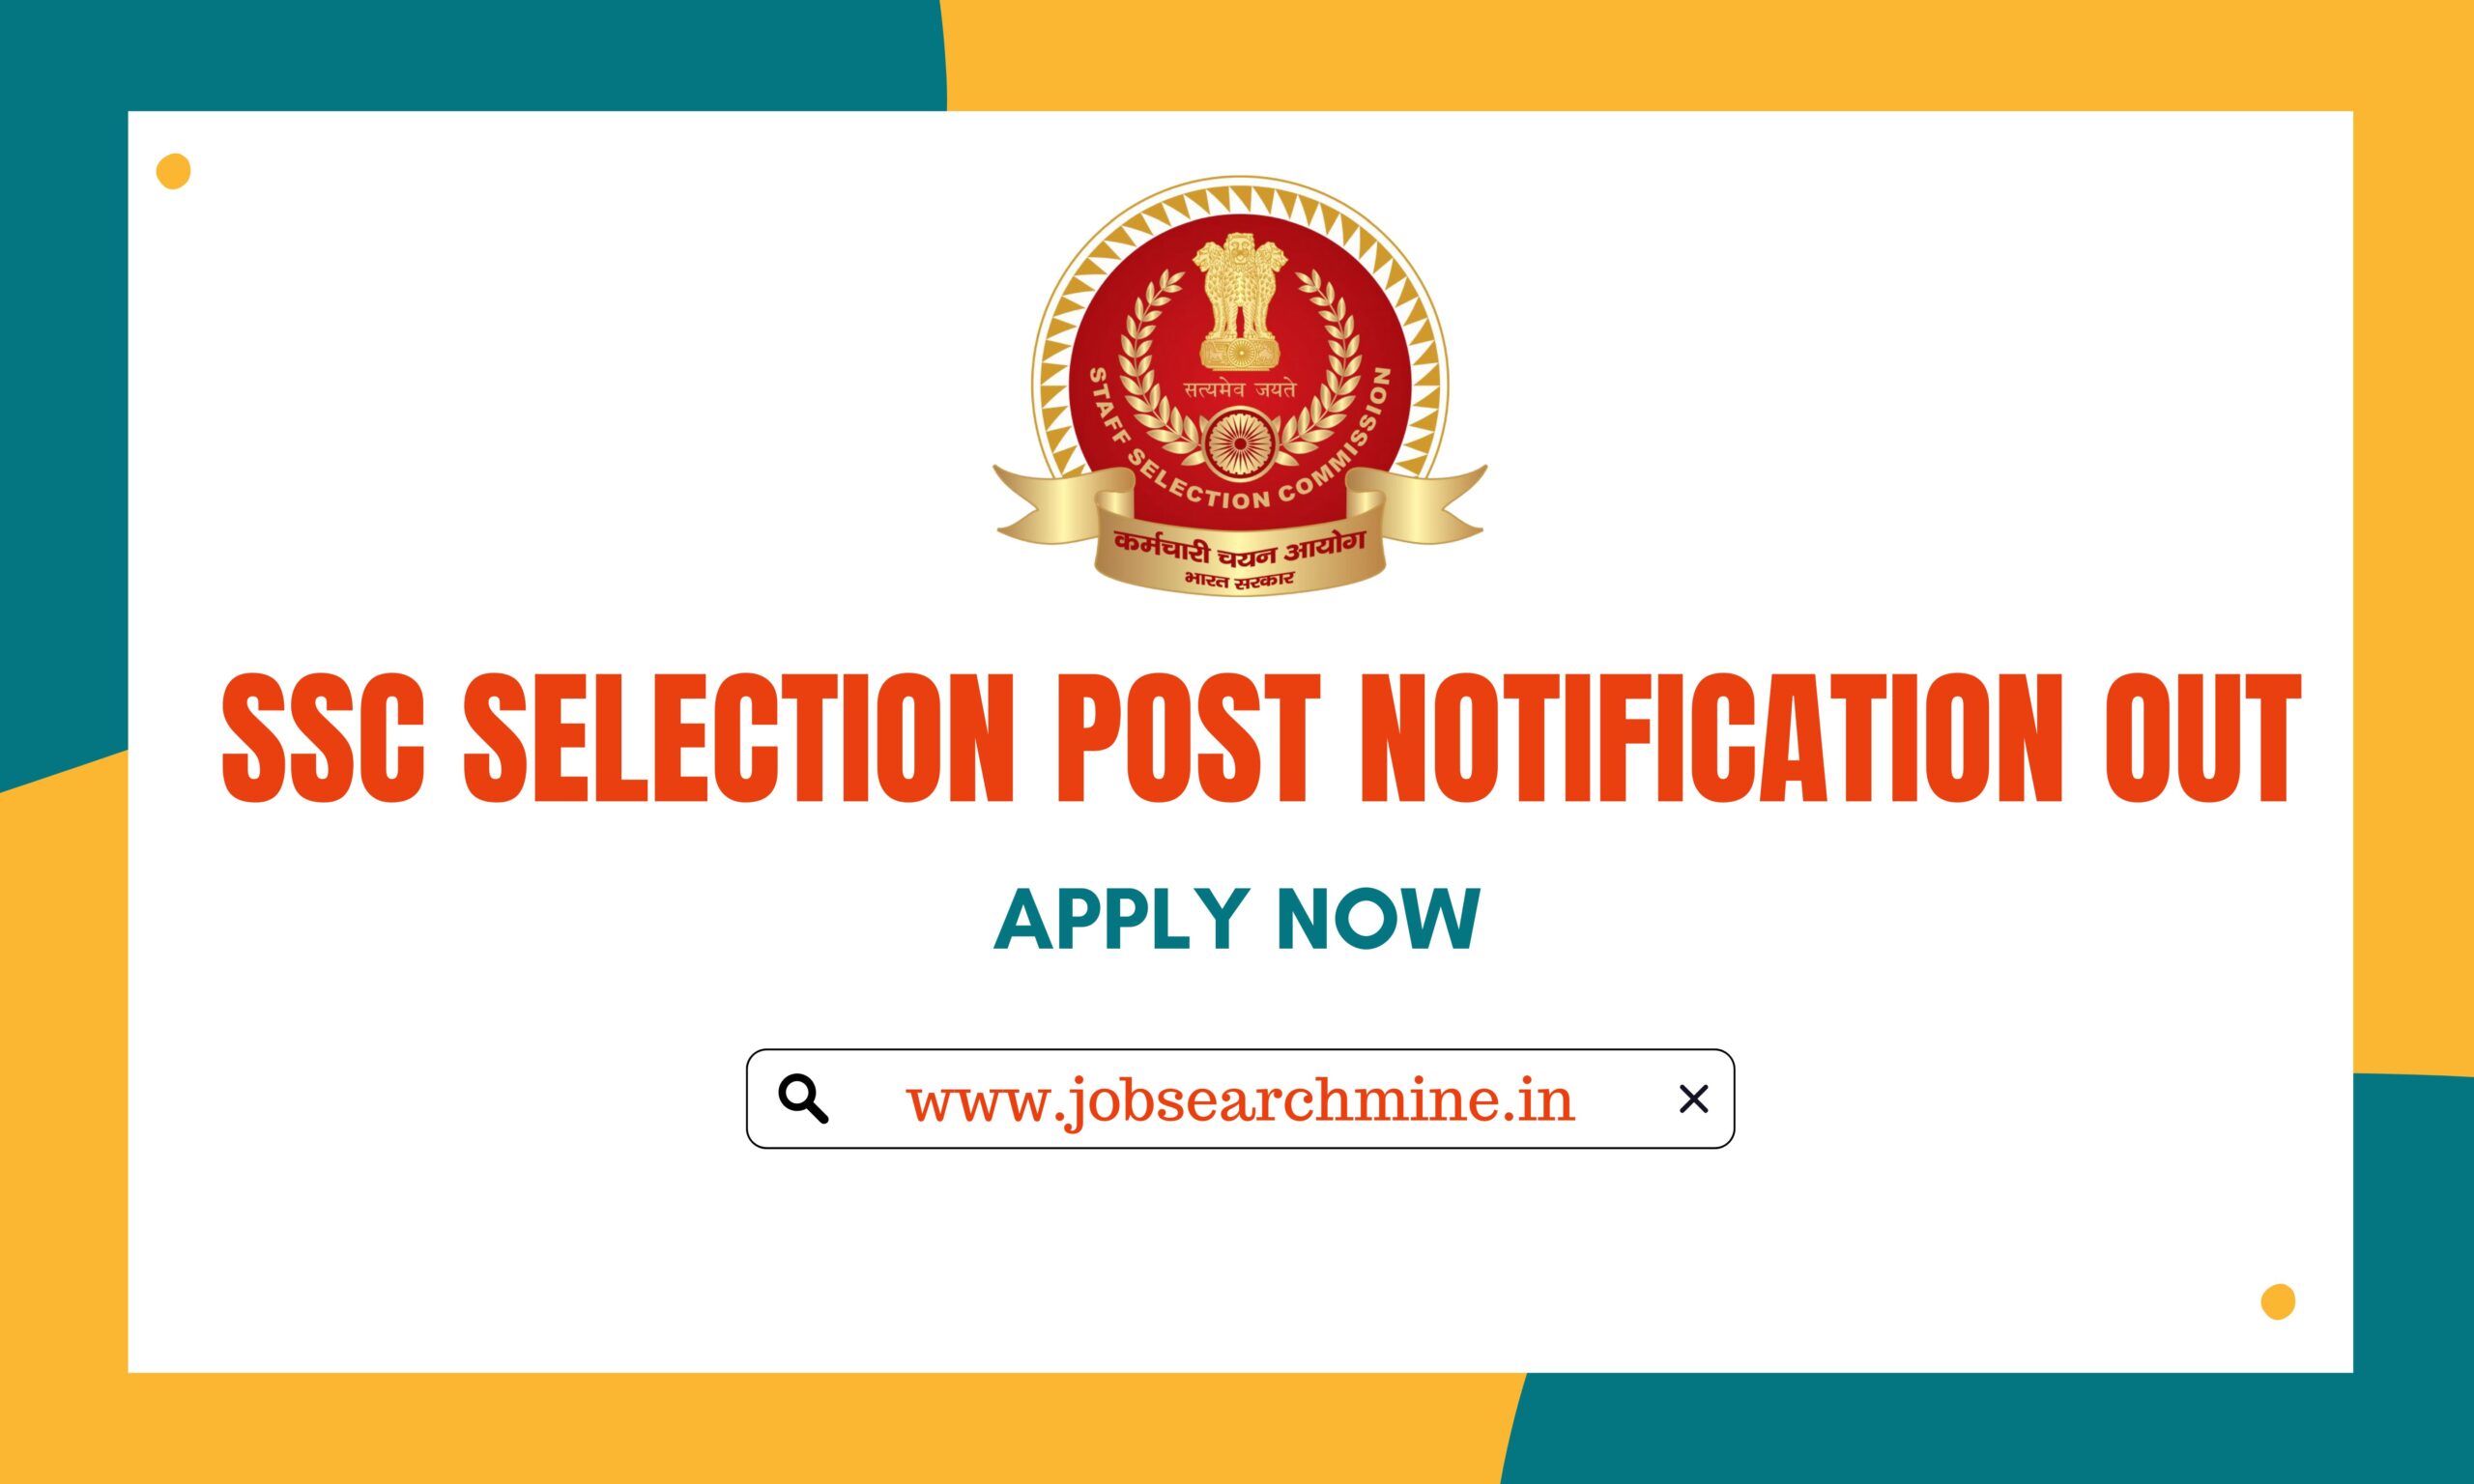 SSC selection post